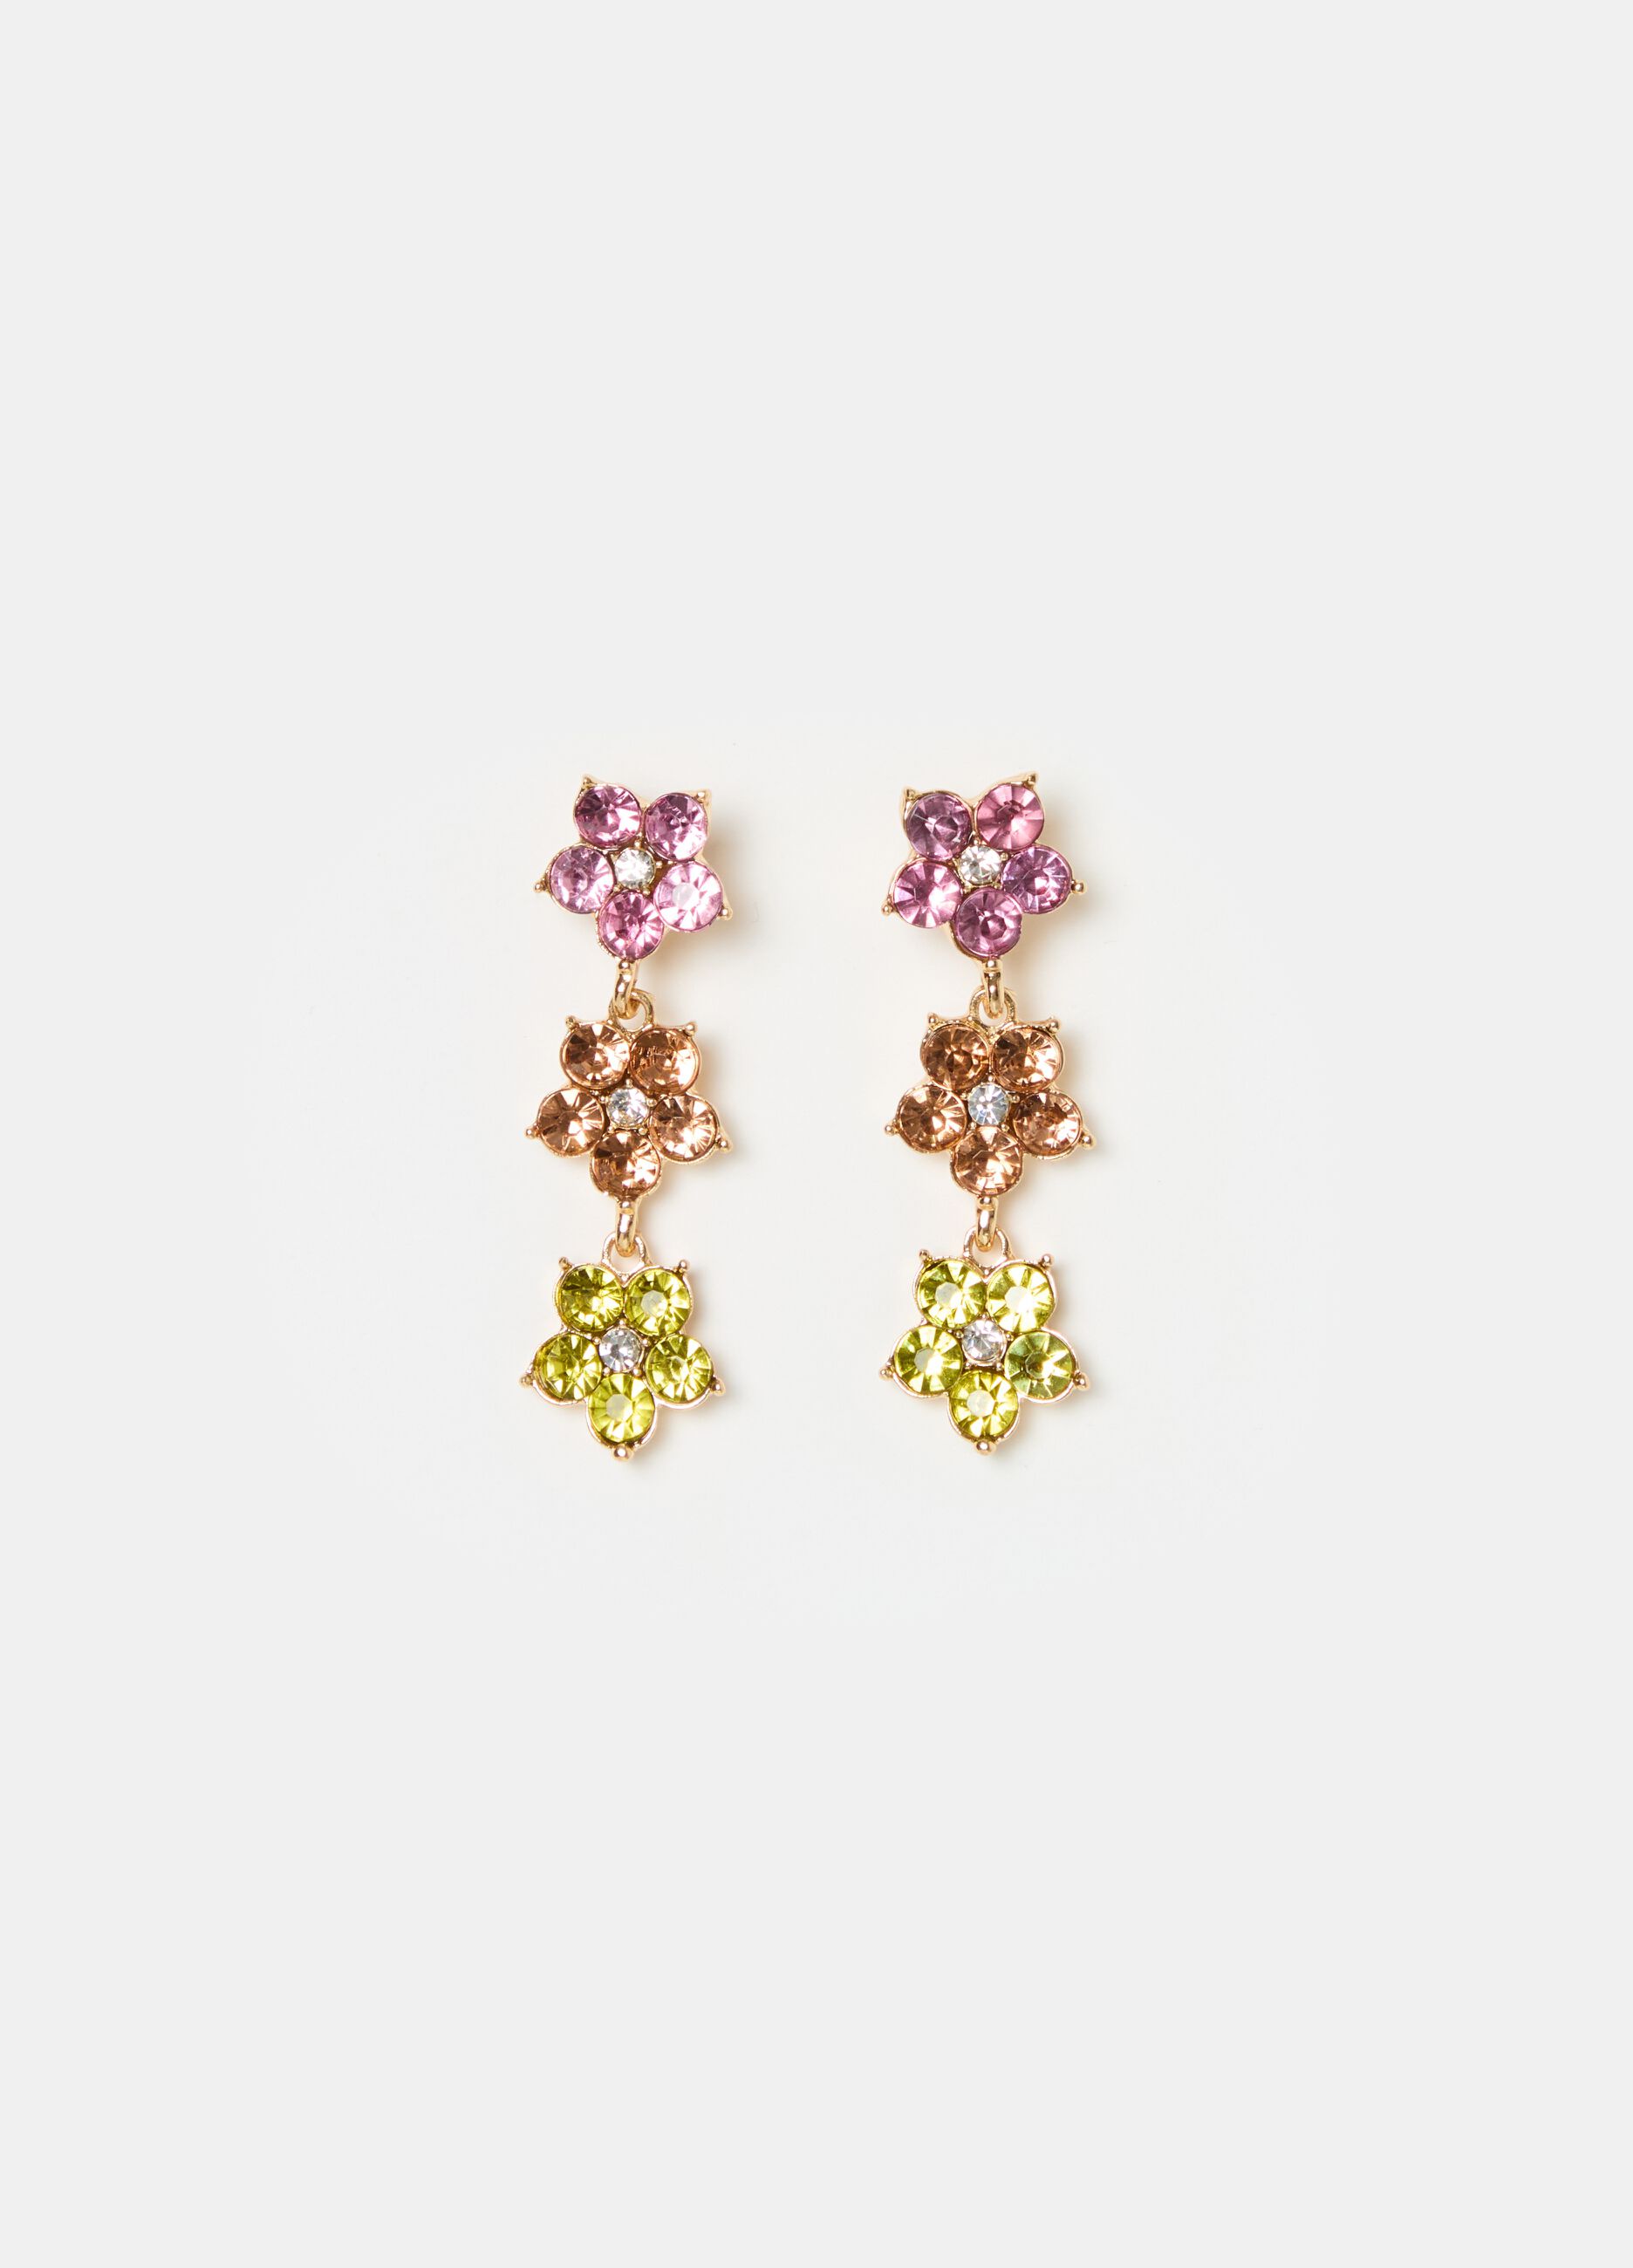 Earrings with multicoloured stone flowers